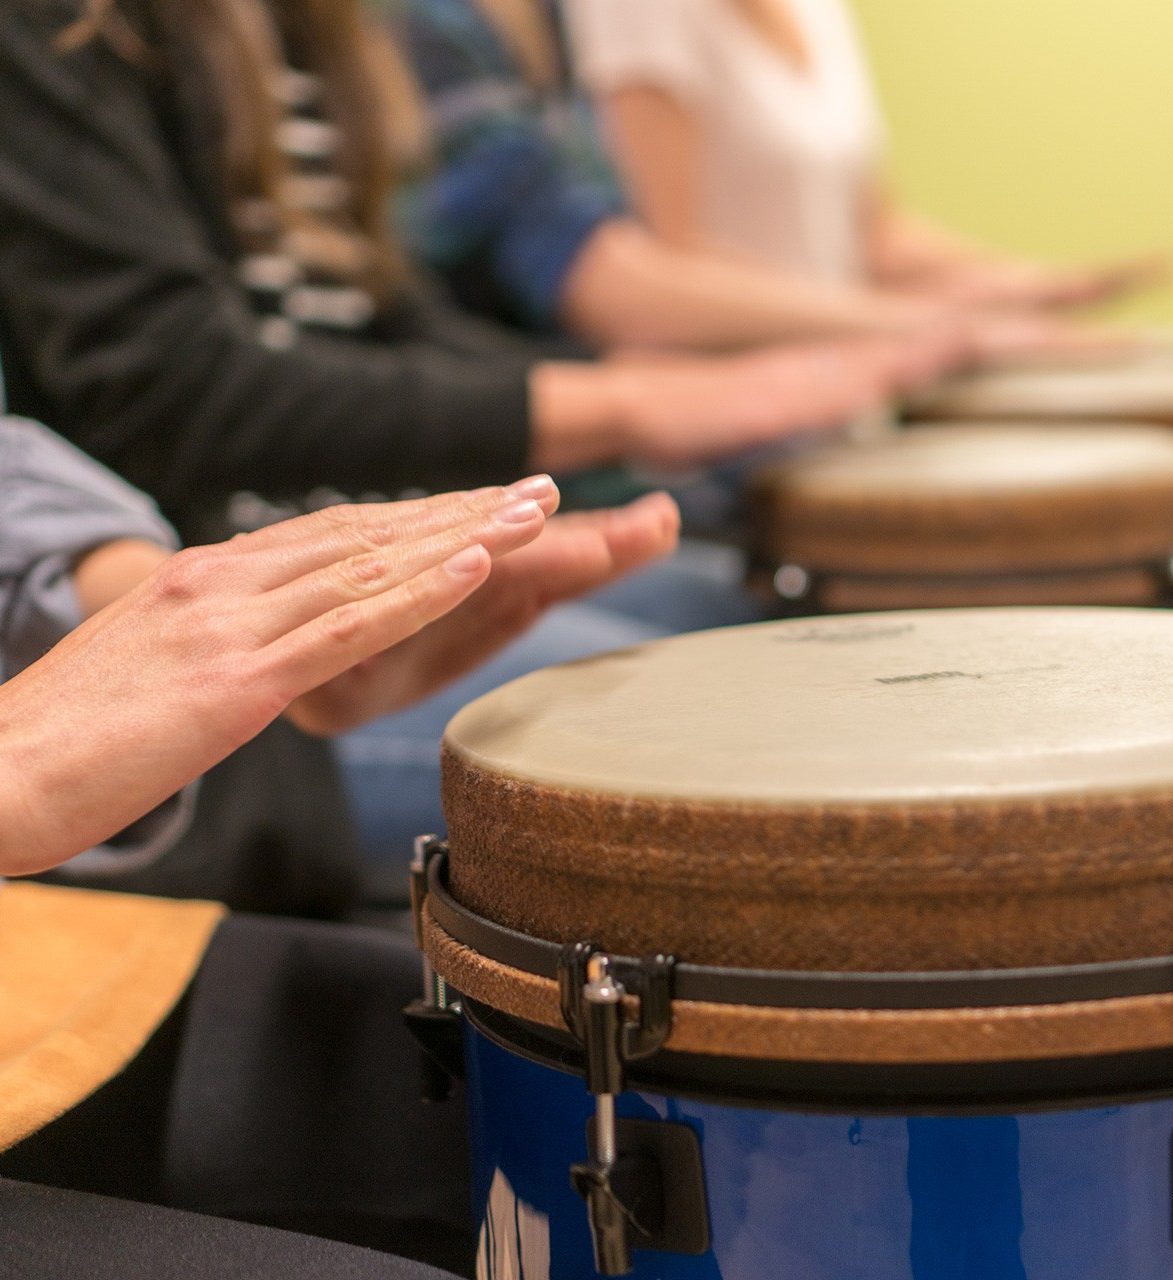 Close up of hands poised over a drum in the foreground.